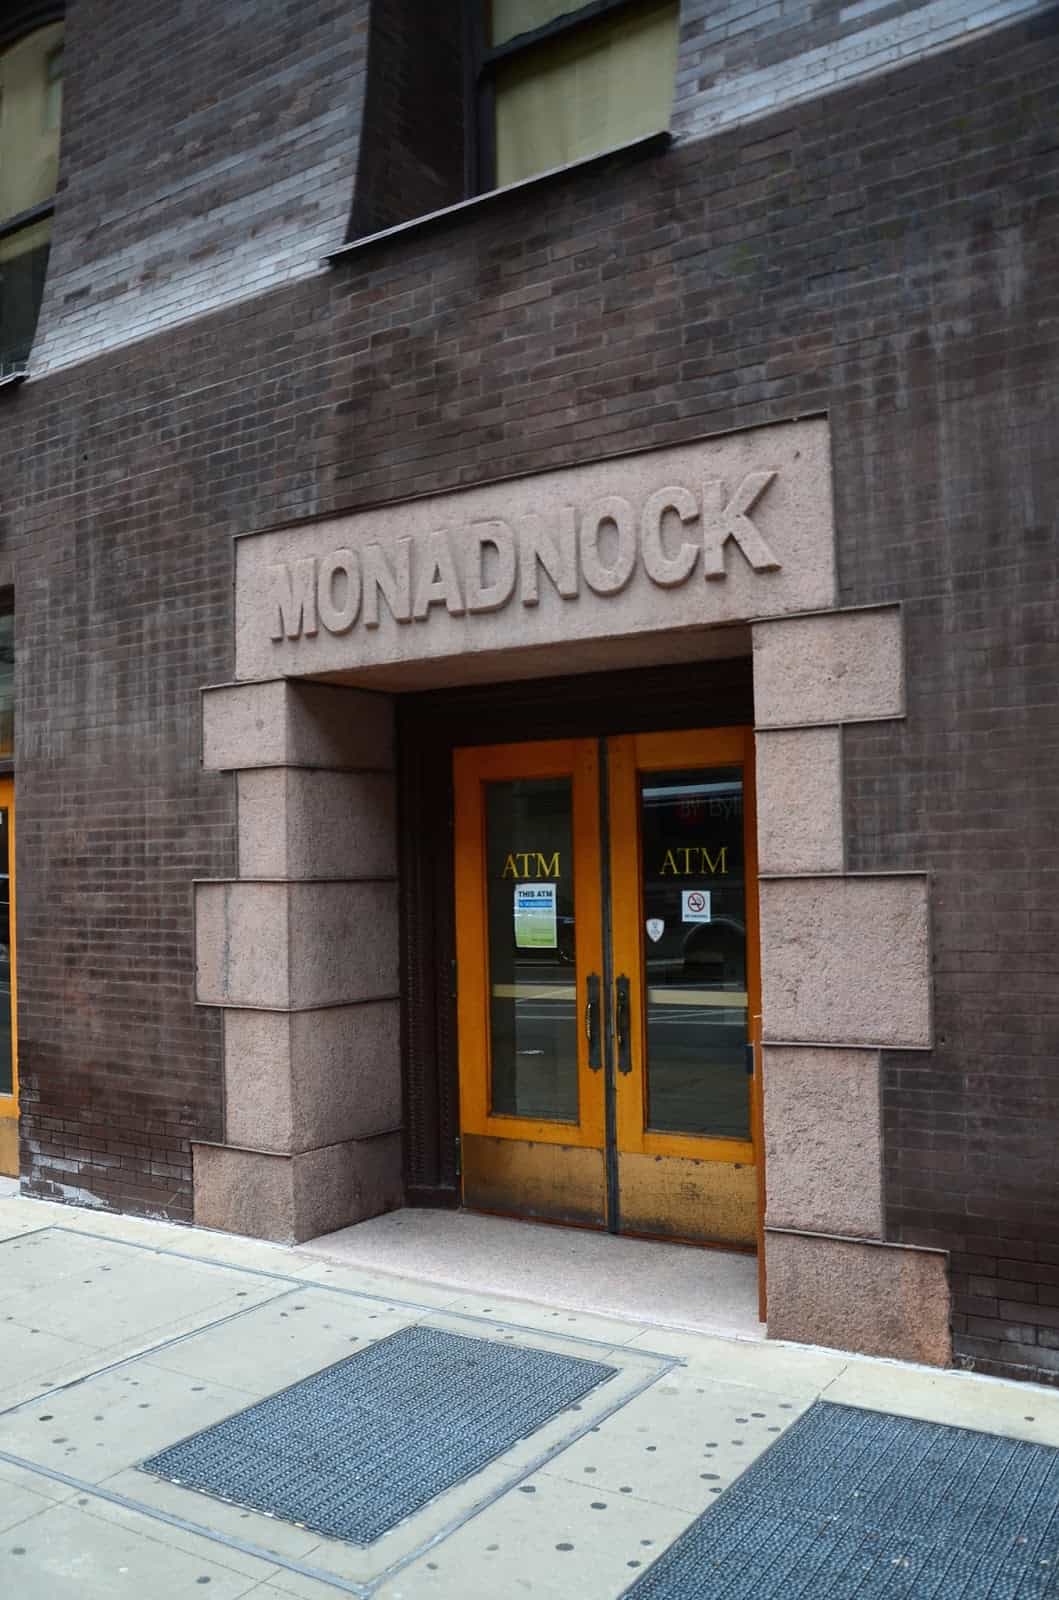 Entrance to the Monadnock Building in Chicago